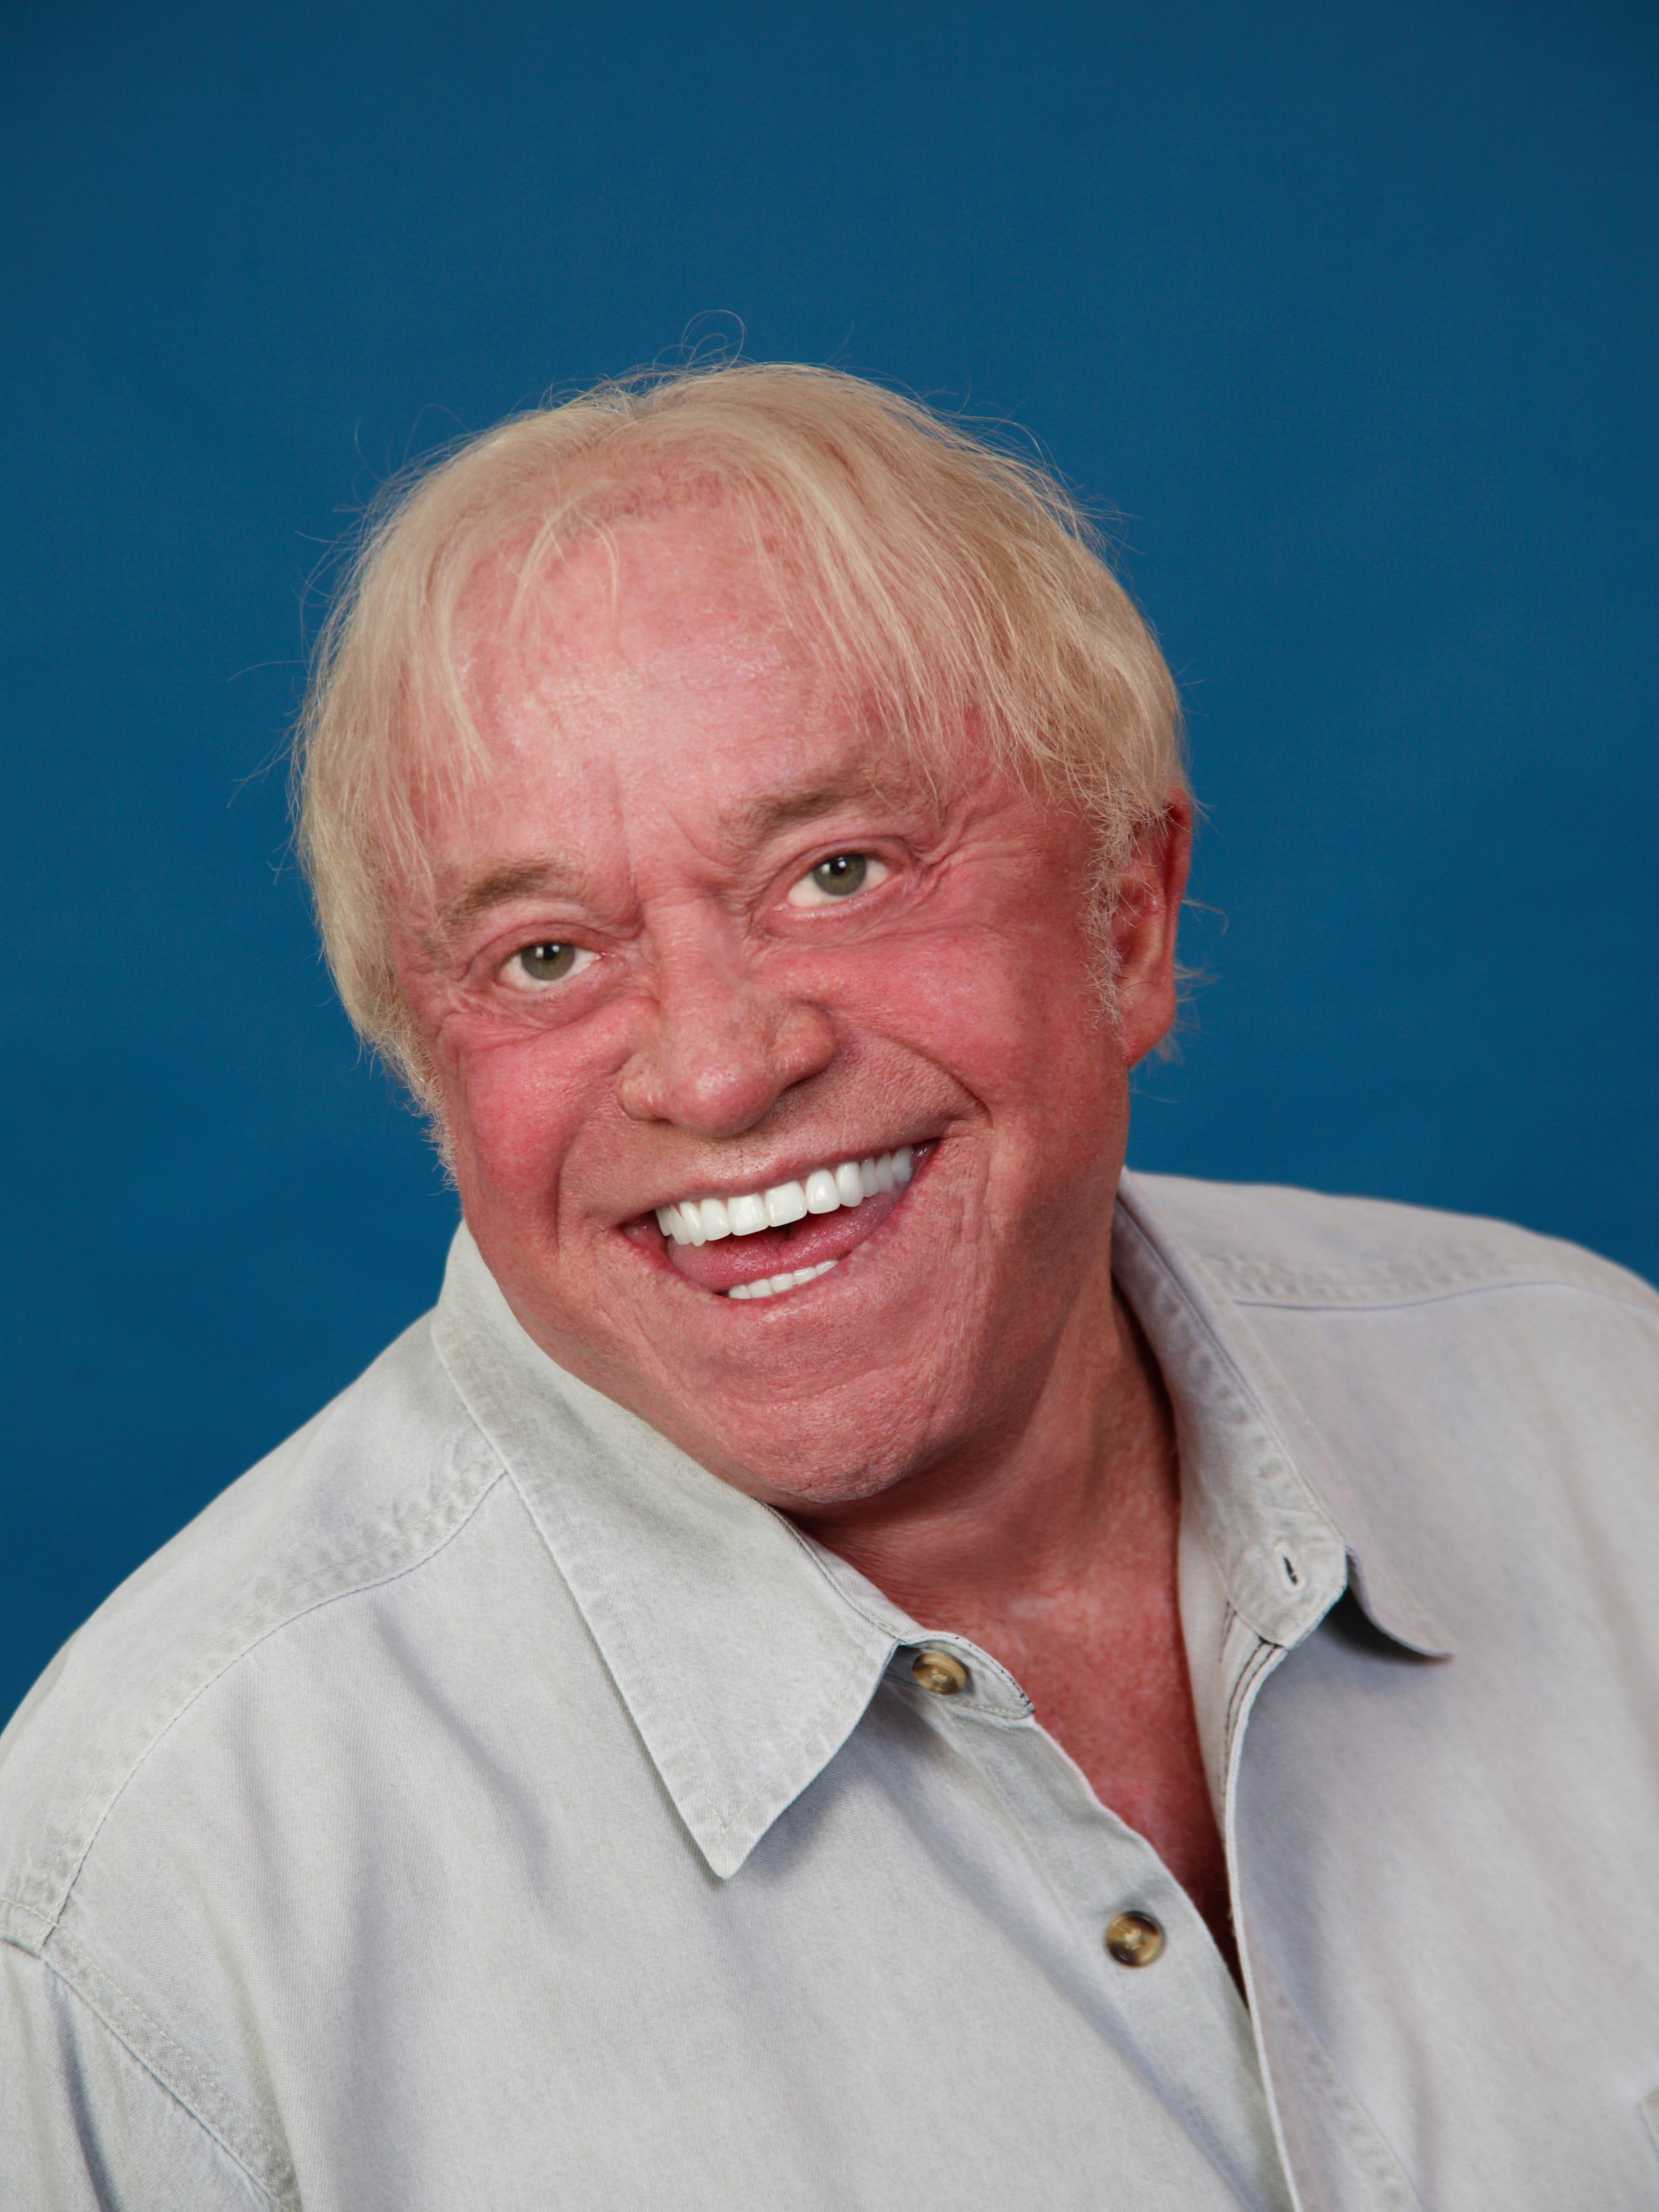 James Gregory performs at the Montgomery Performing Arts Centre on Thursday